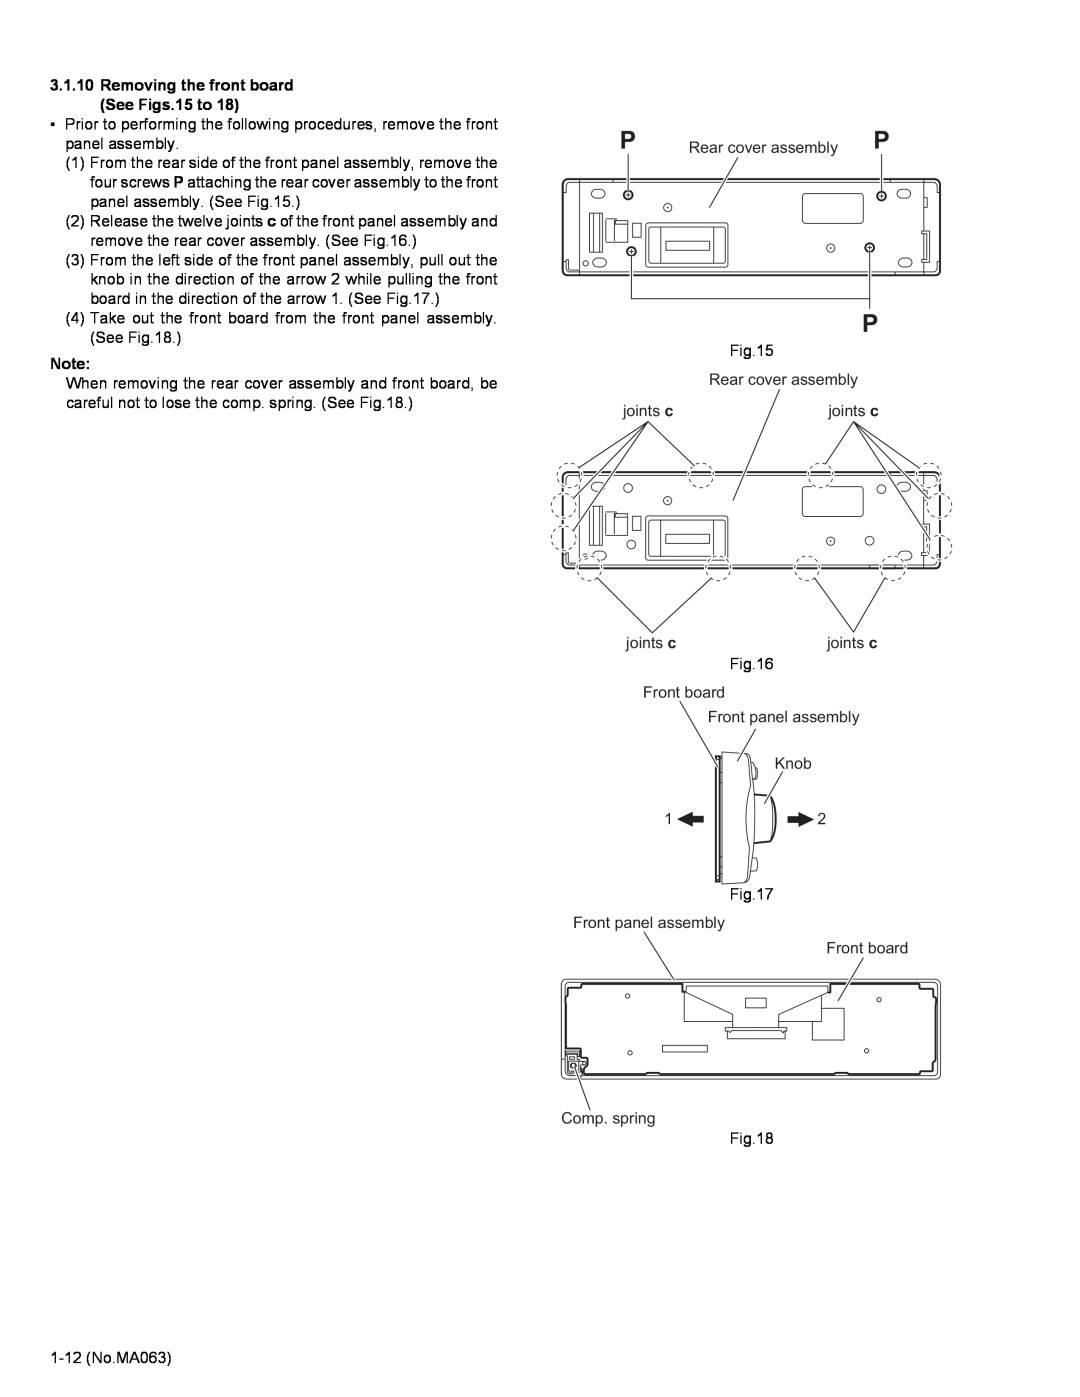 JVC KD-LH401 service manual Removing the front board See Figs.15 to, Rear cover assembly P 